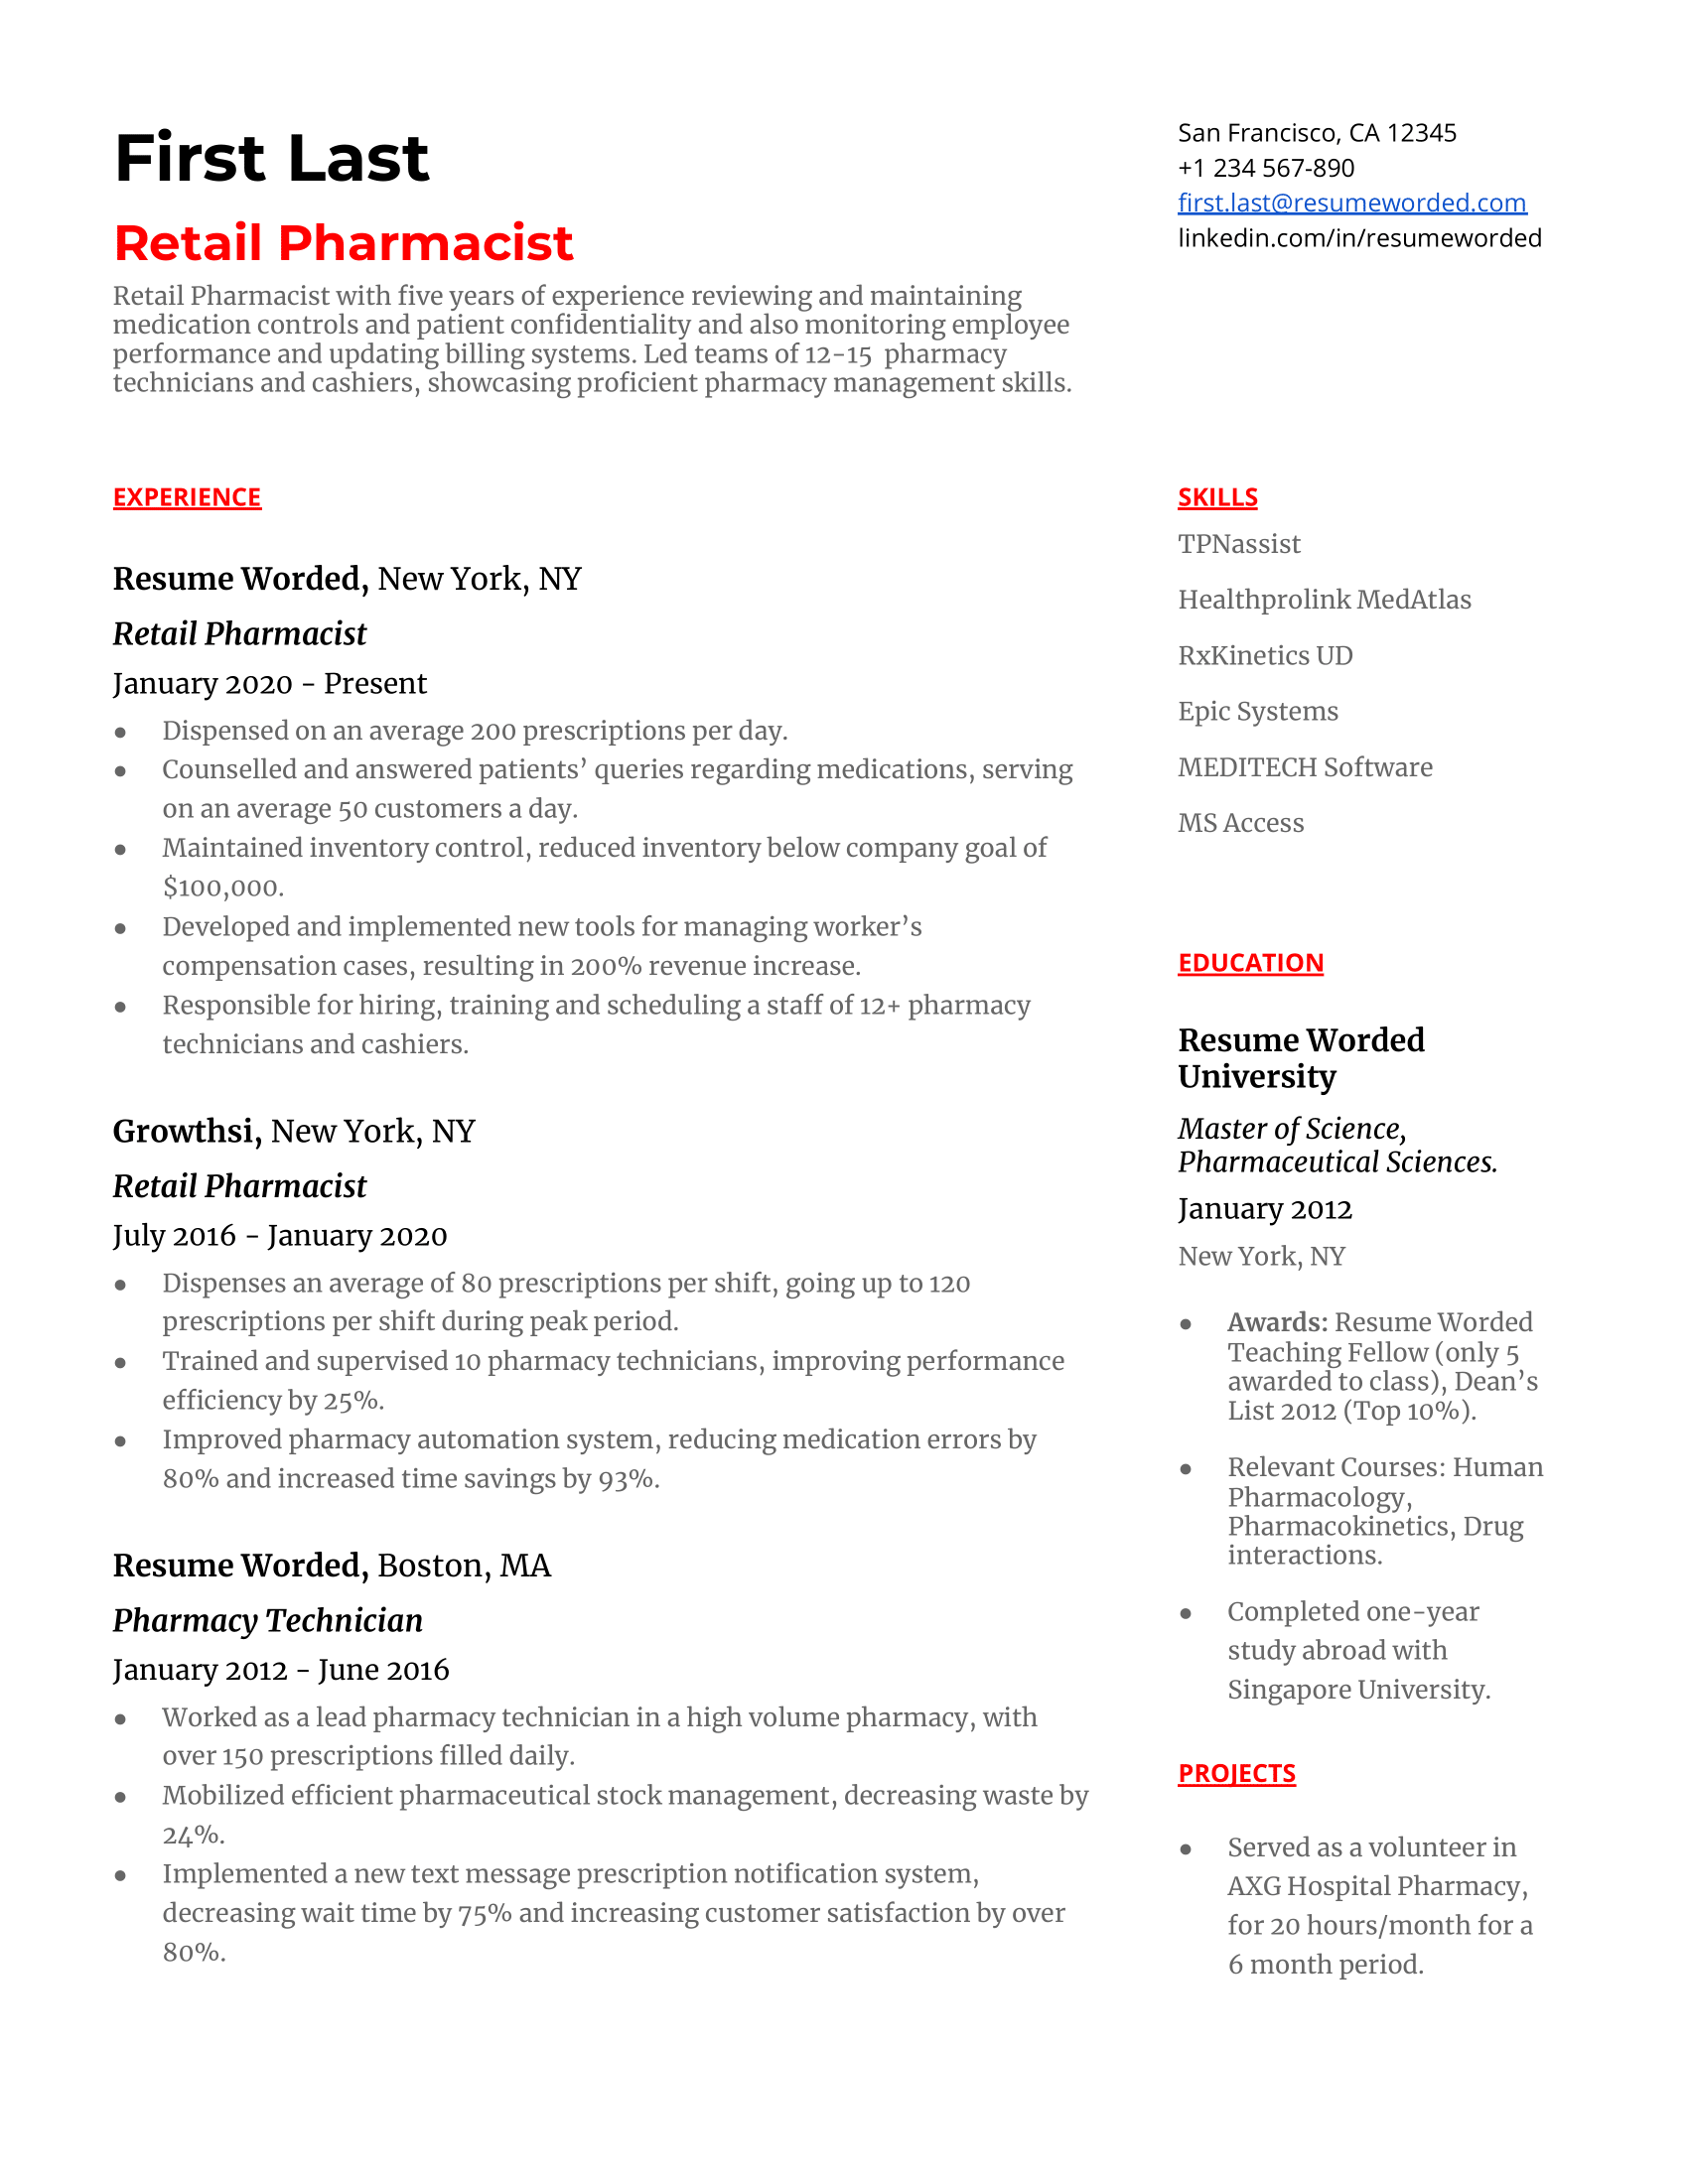 A resume for a retail pharmacist with a degree in pharmacy and experience as a drug safety associate.